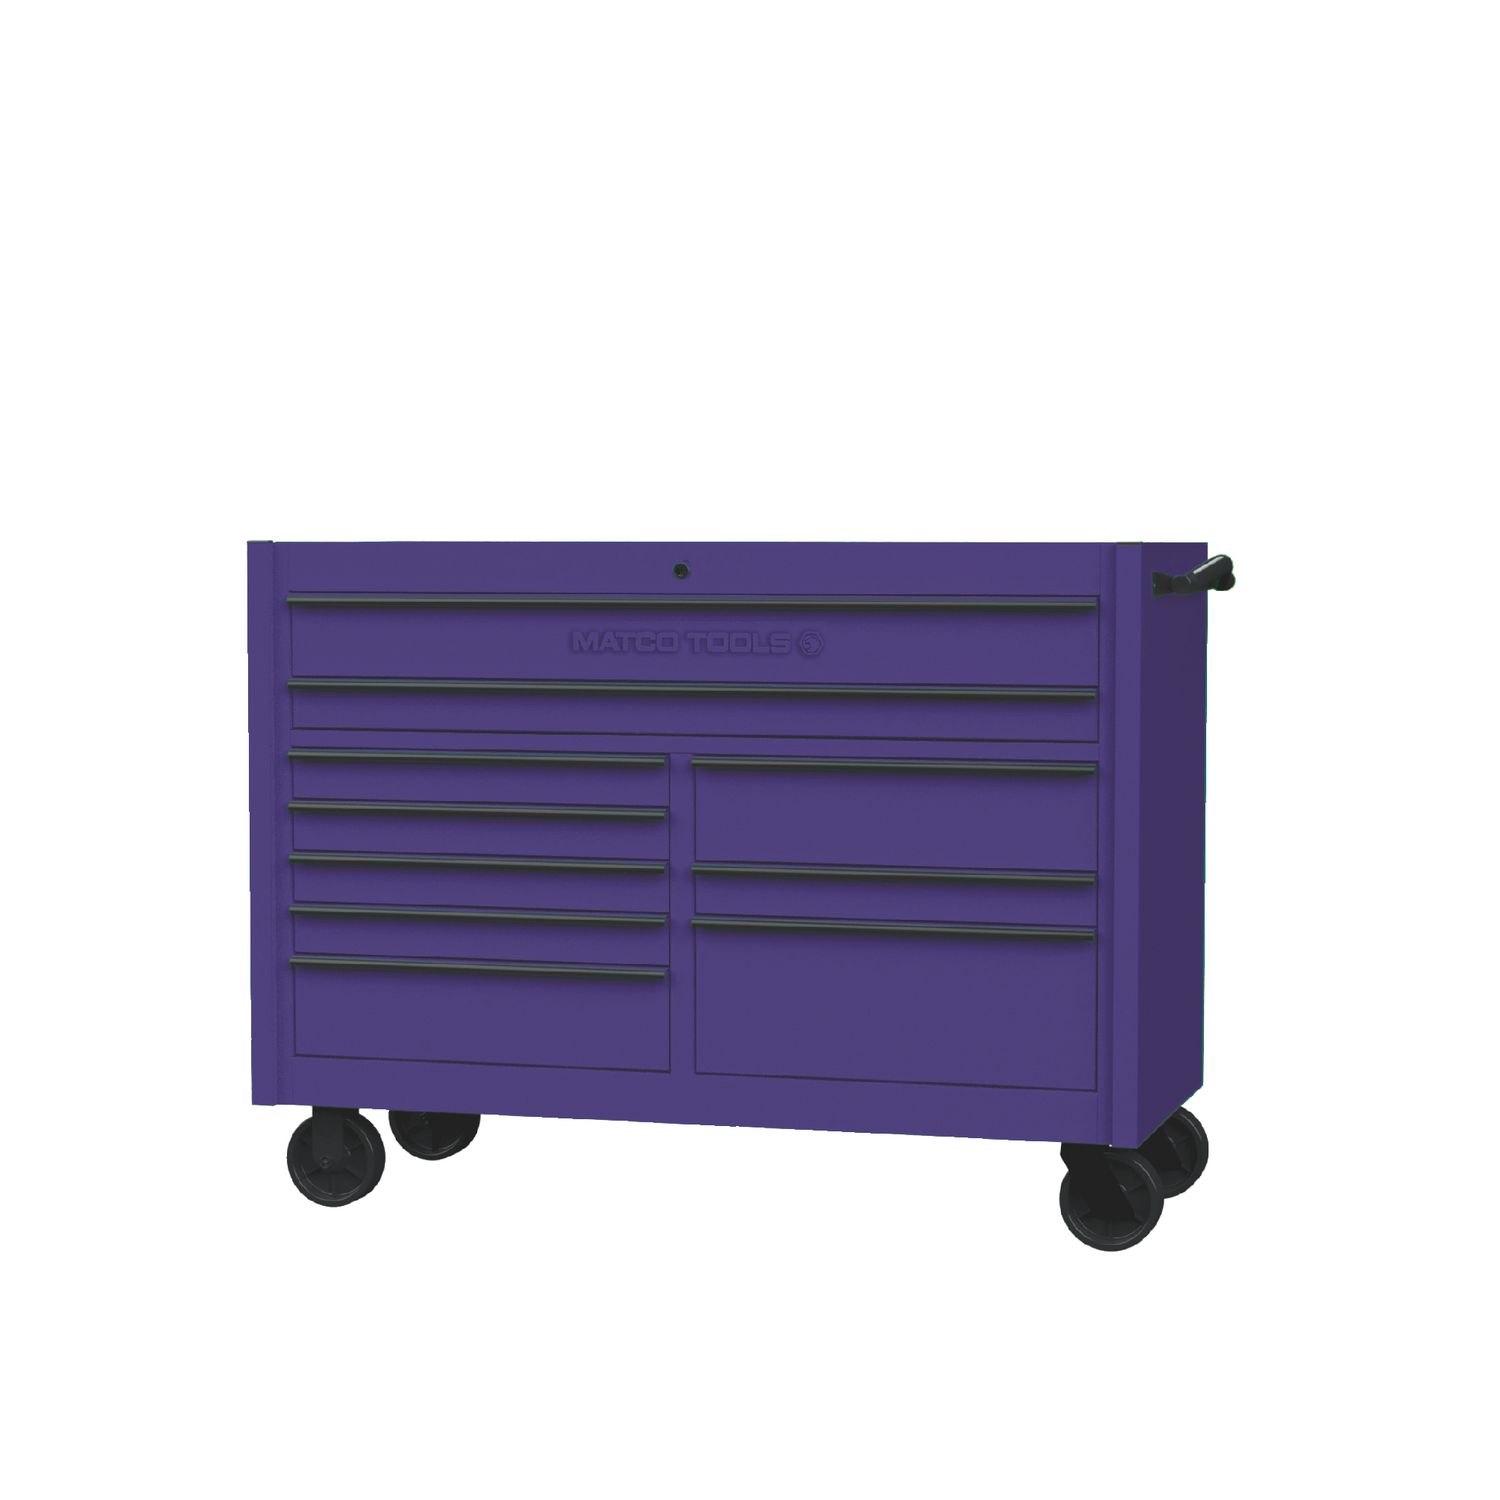 ASTRO PRODUCTS compact tool box matt purple limited color NEW JP